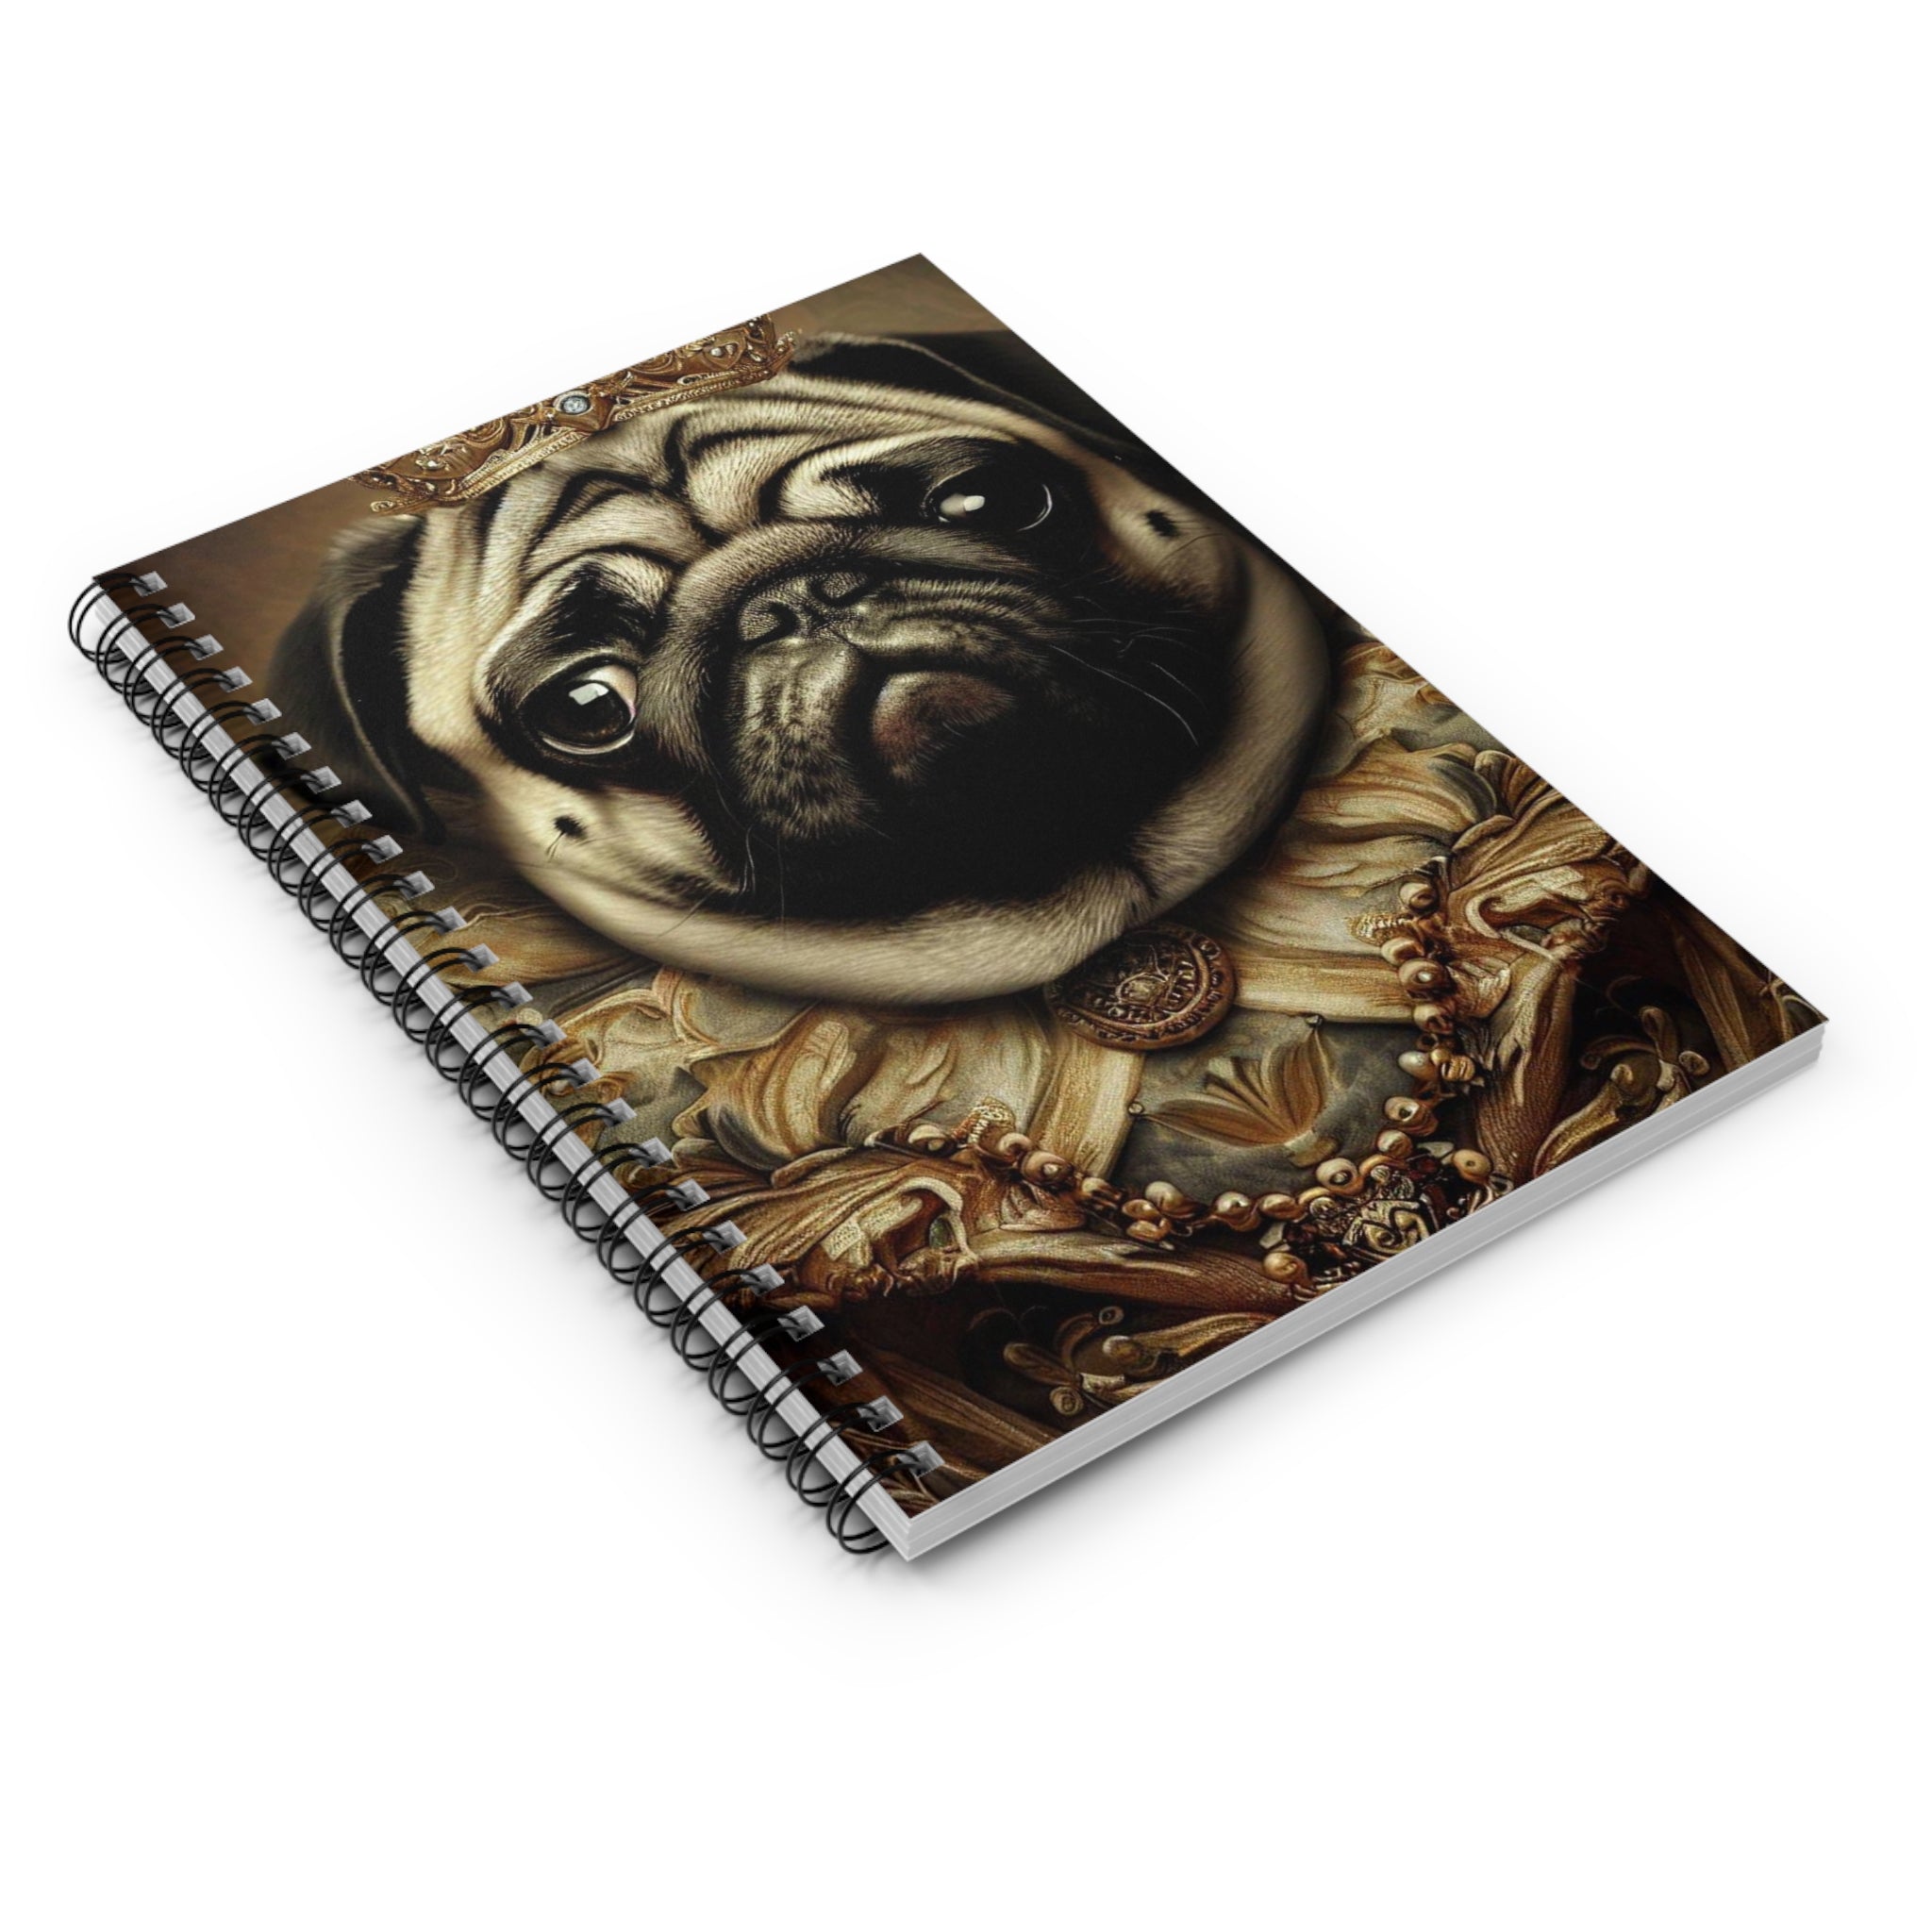 Spiral Notebook - Ruled Line Barroco Style